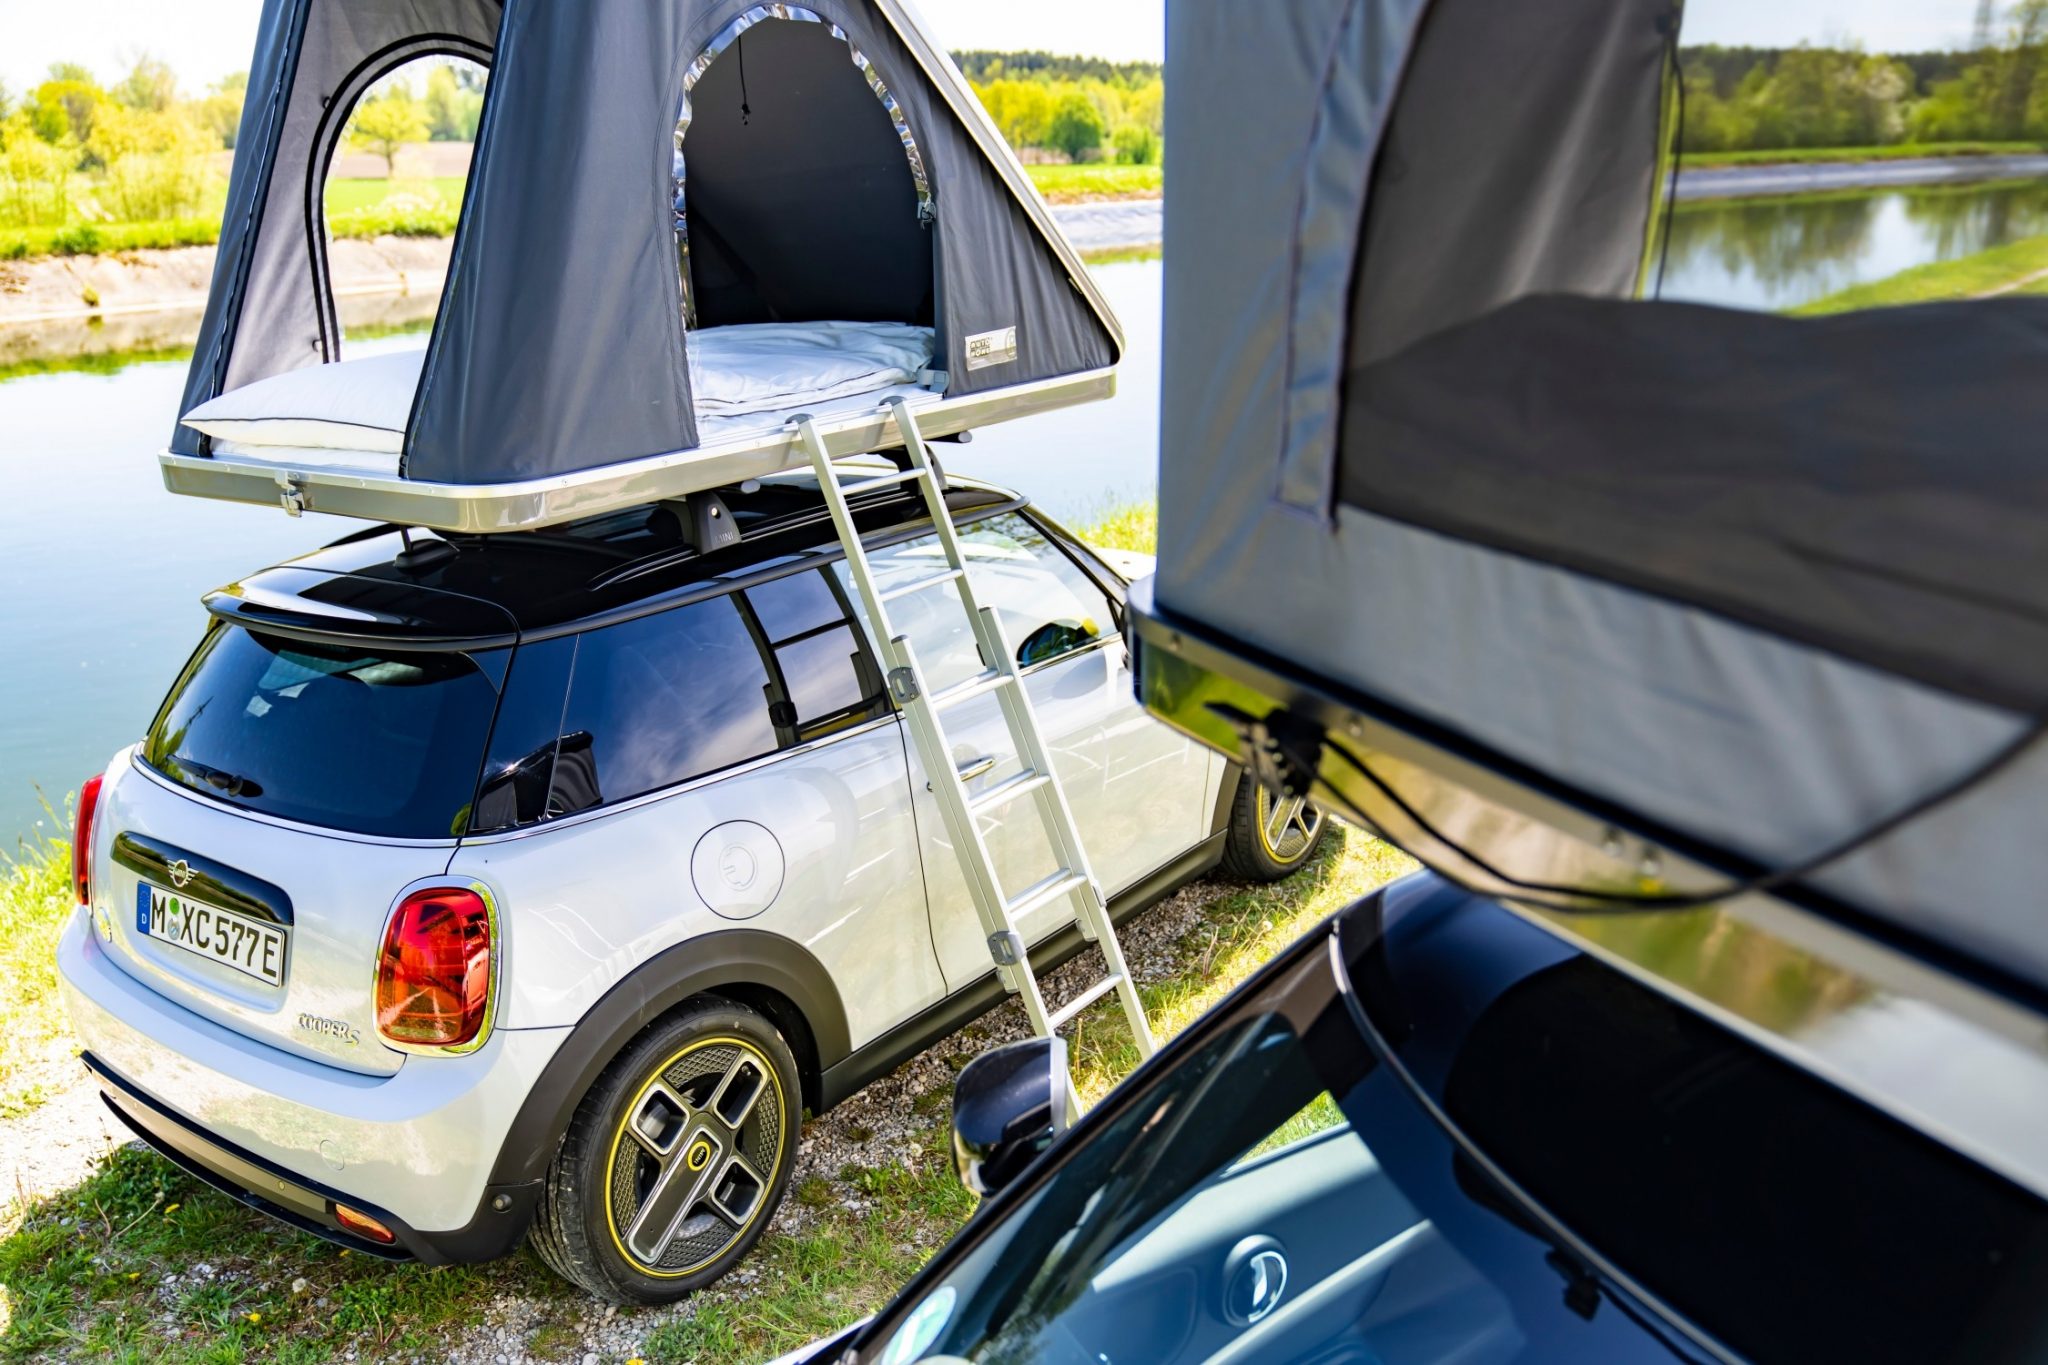 MINI Unveils New Roof Tent For Its AllElectric Cooper SE Automacha